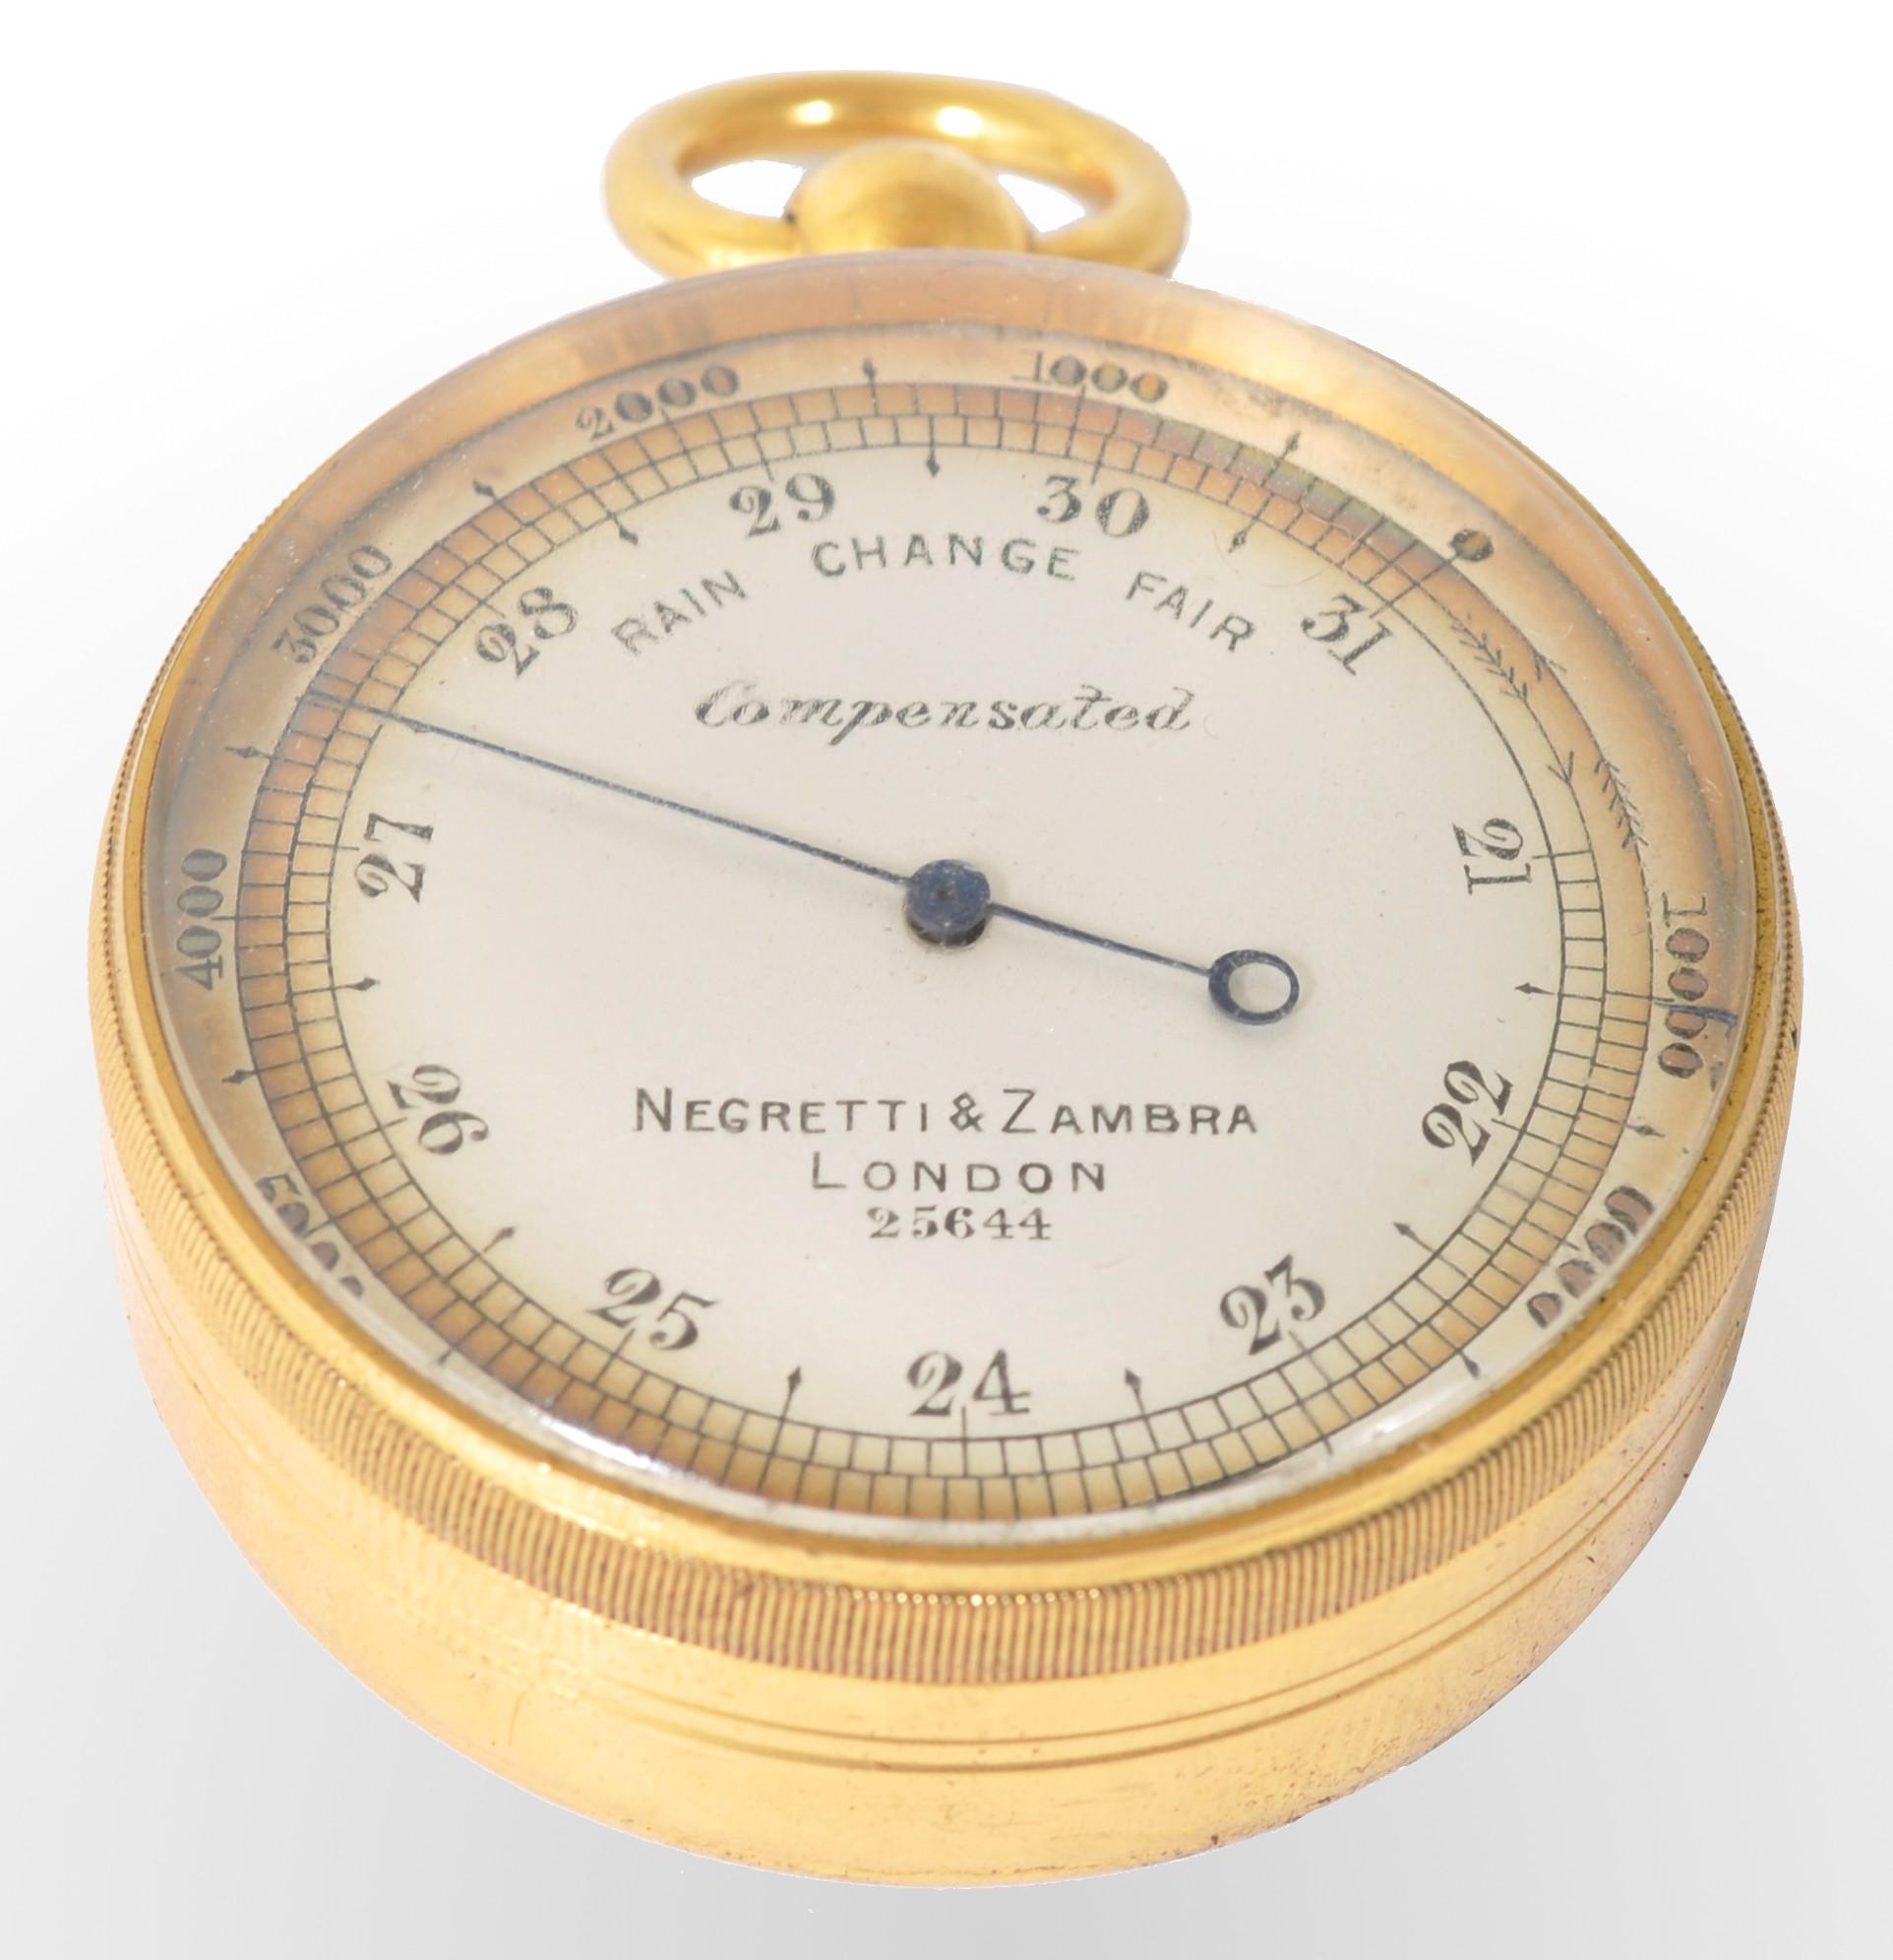 Antique 19th century pocket barometer by Negretti & Zambra of London, circa 1880. The barometer in a gilded metal case with a white enamel dial. The barometer housed in the original outer sharkskin case.